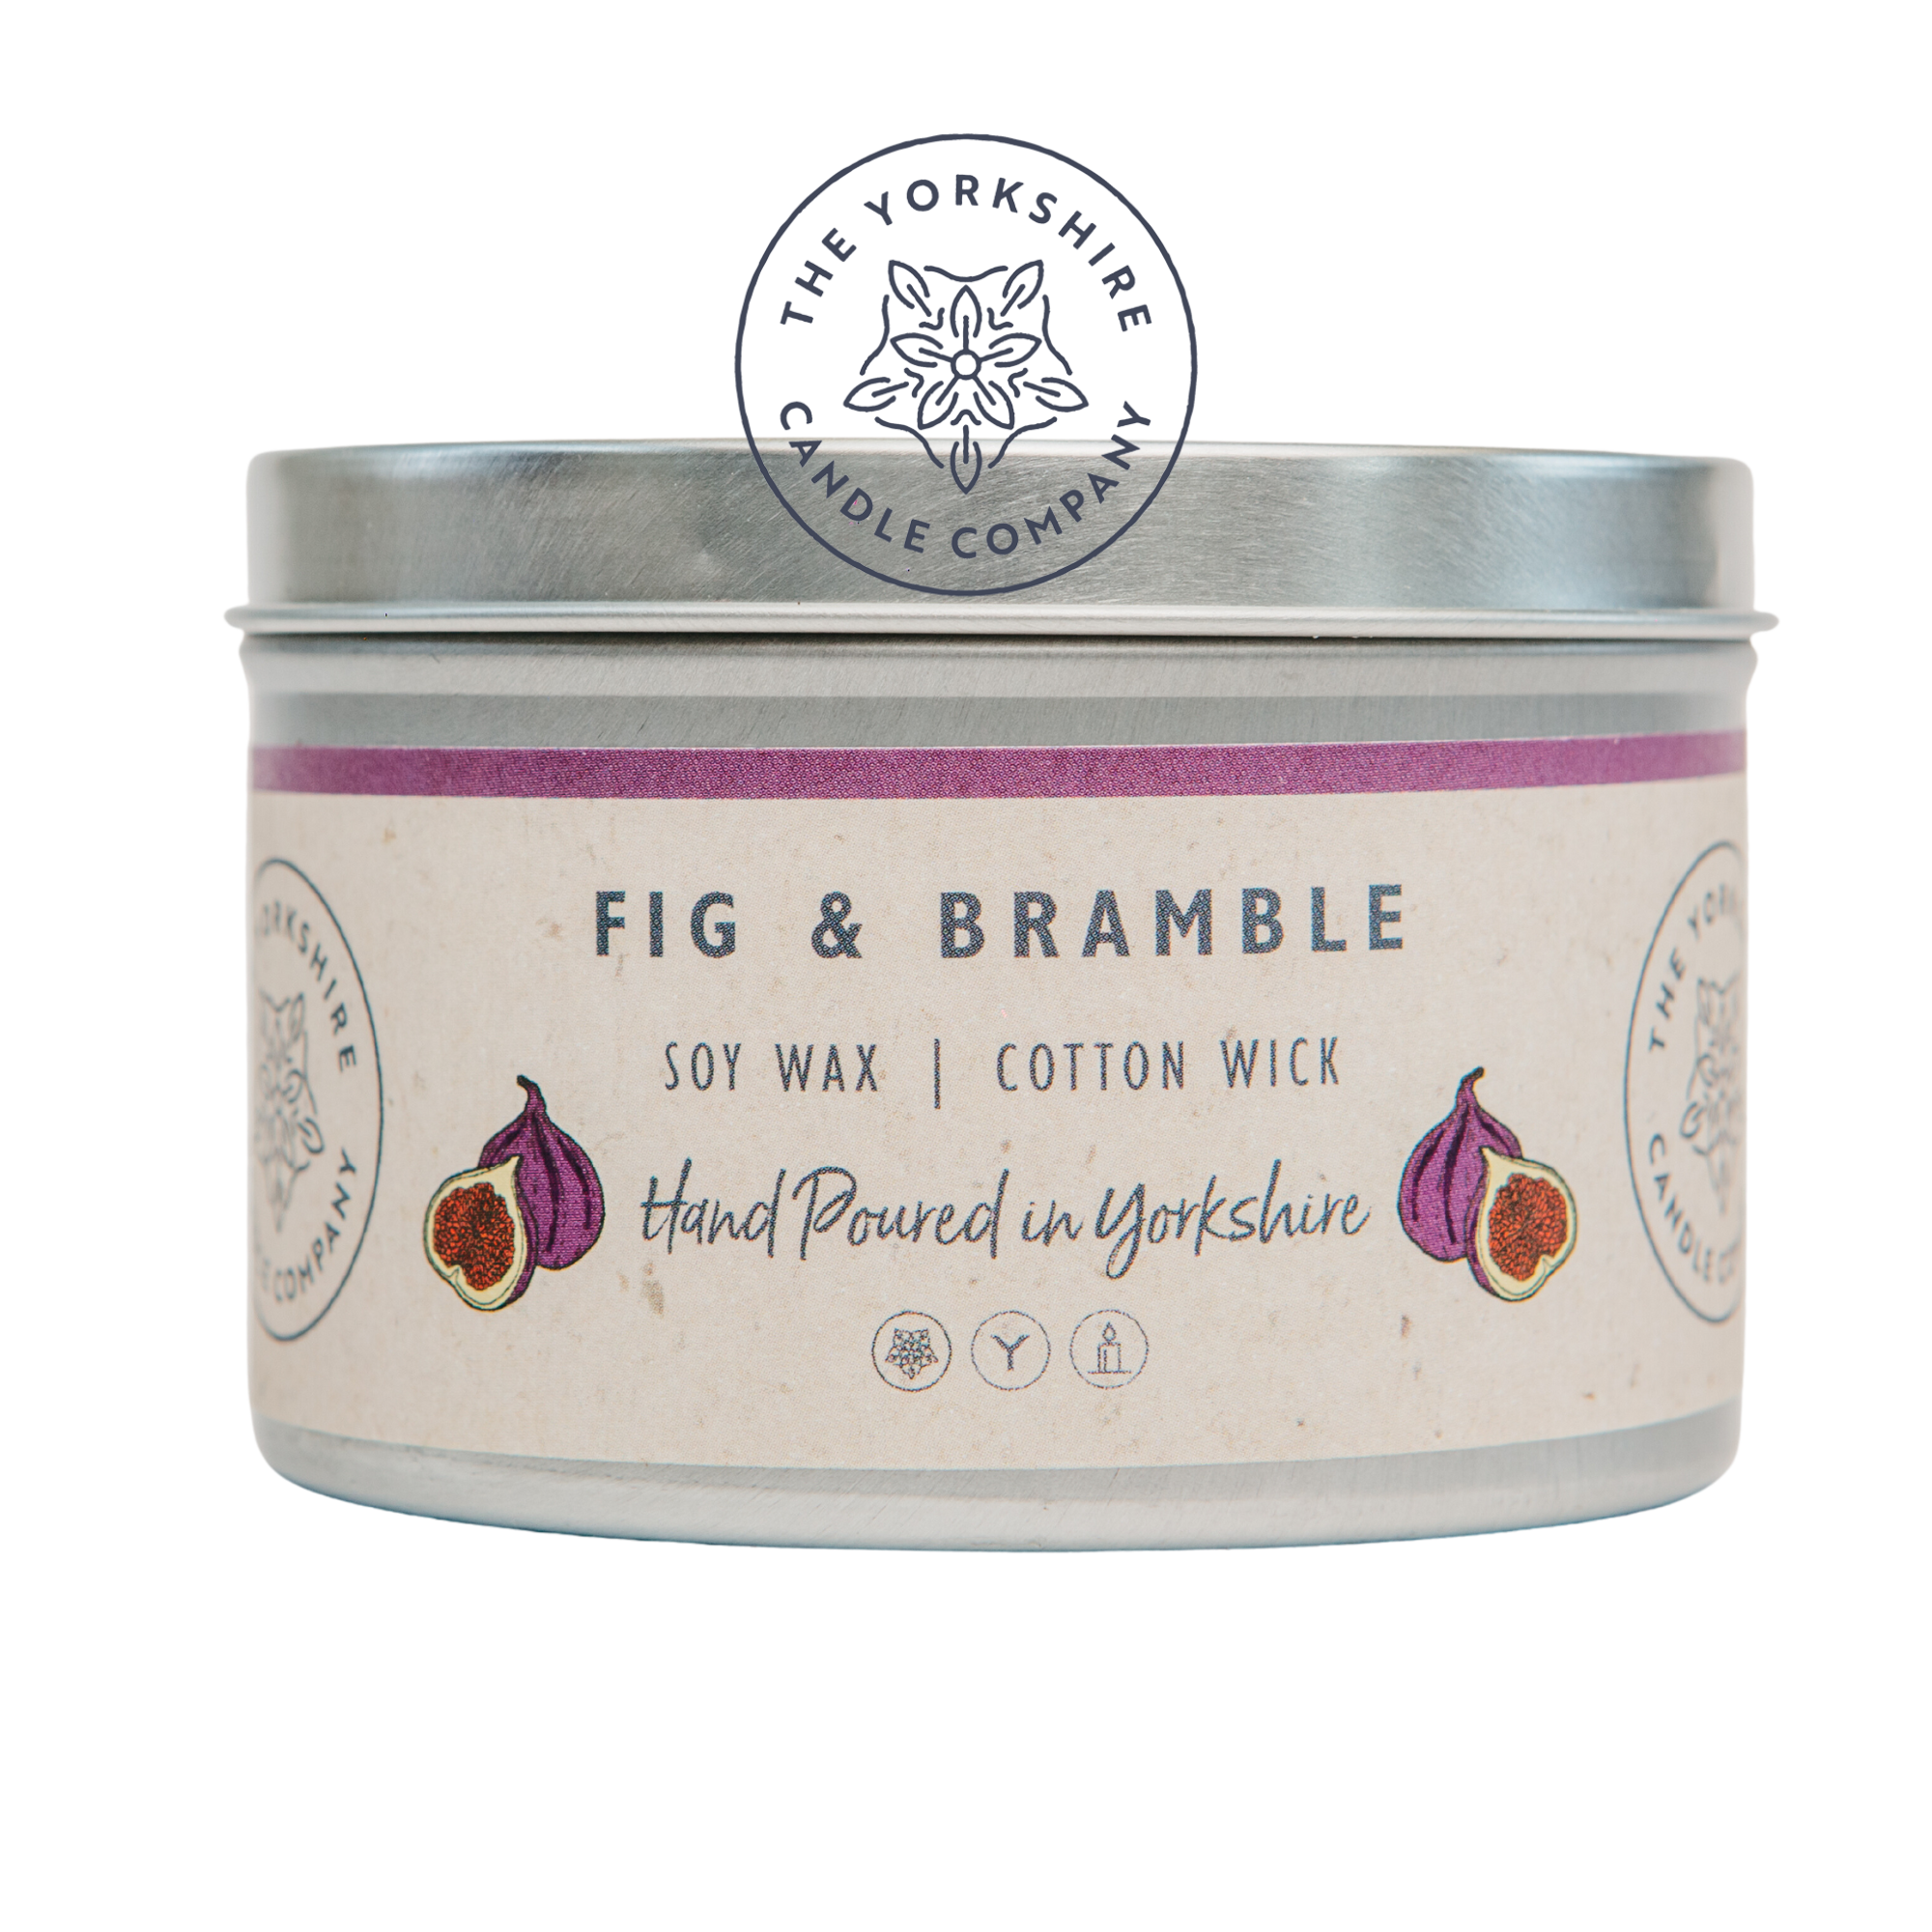 Fig & Bramble - Soy Wax Cotton Wick Hand Poured Candle by The Yorkshire Candle Company